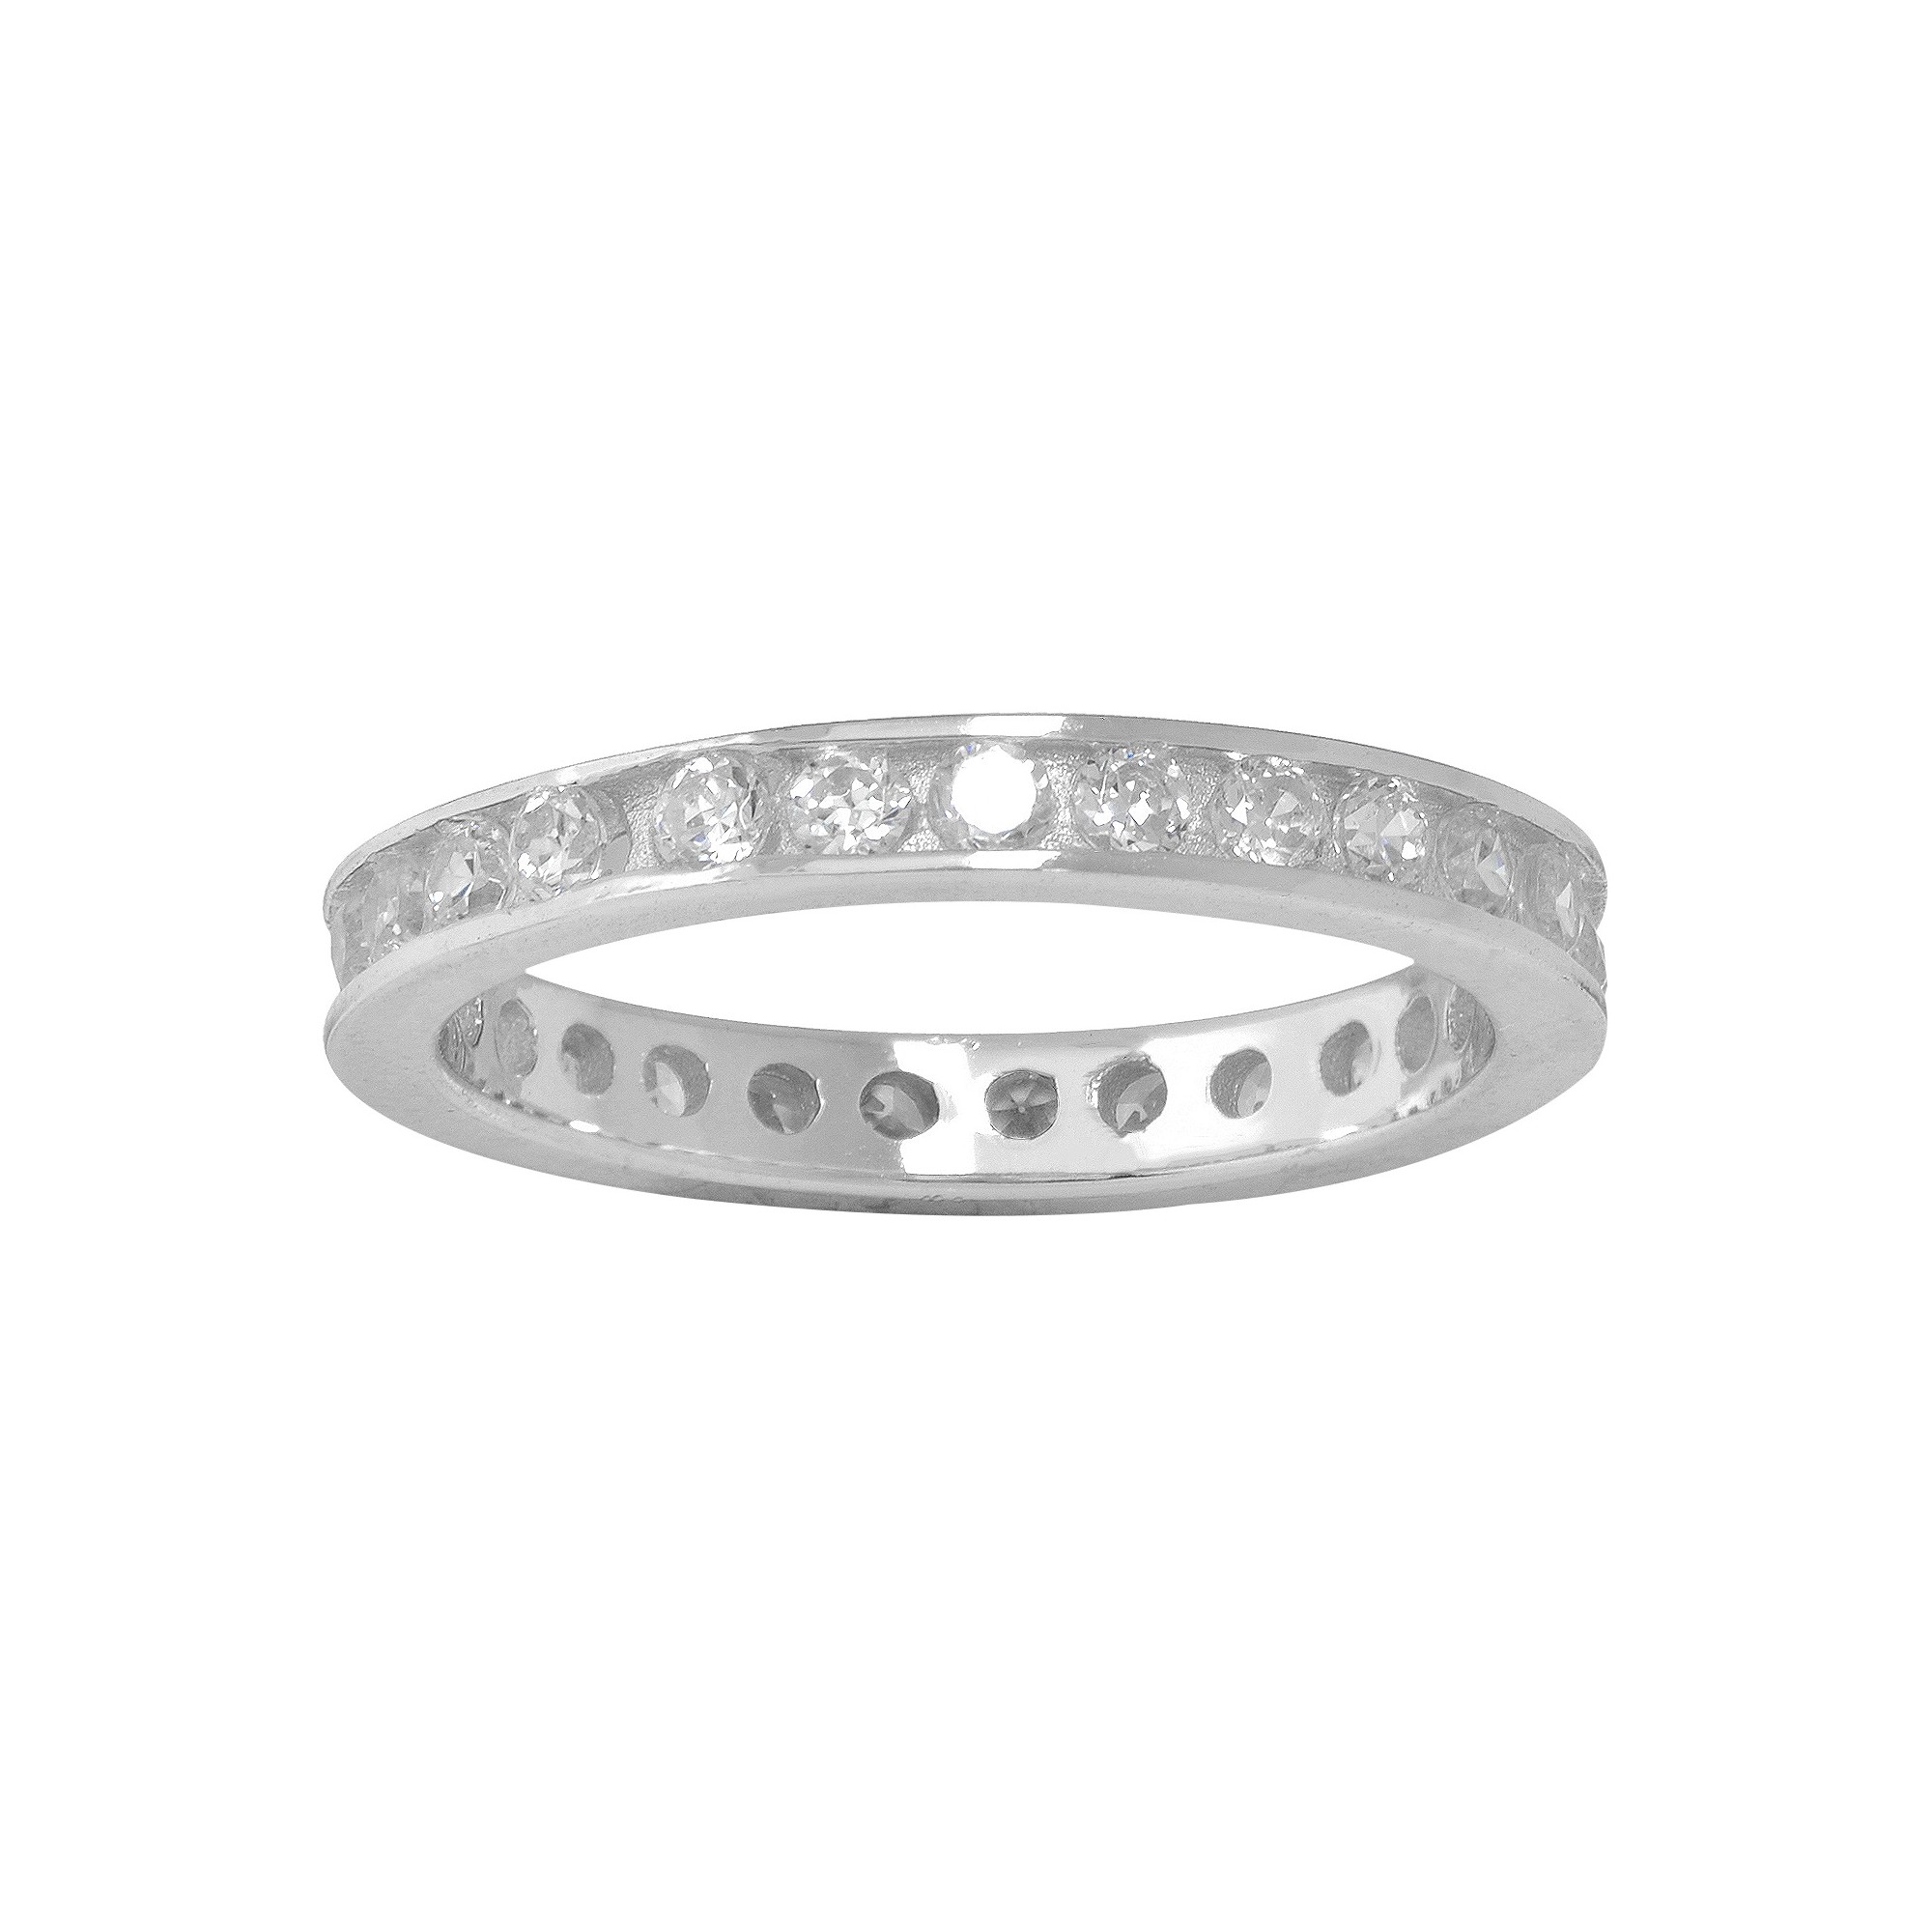 Silver Plated Cubic Zirconia Eternity Band Ring - Size 6, Women's, Clear Silver